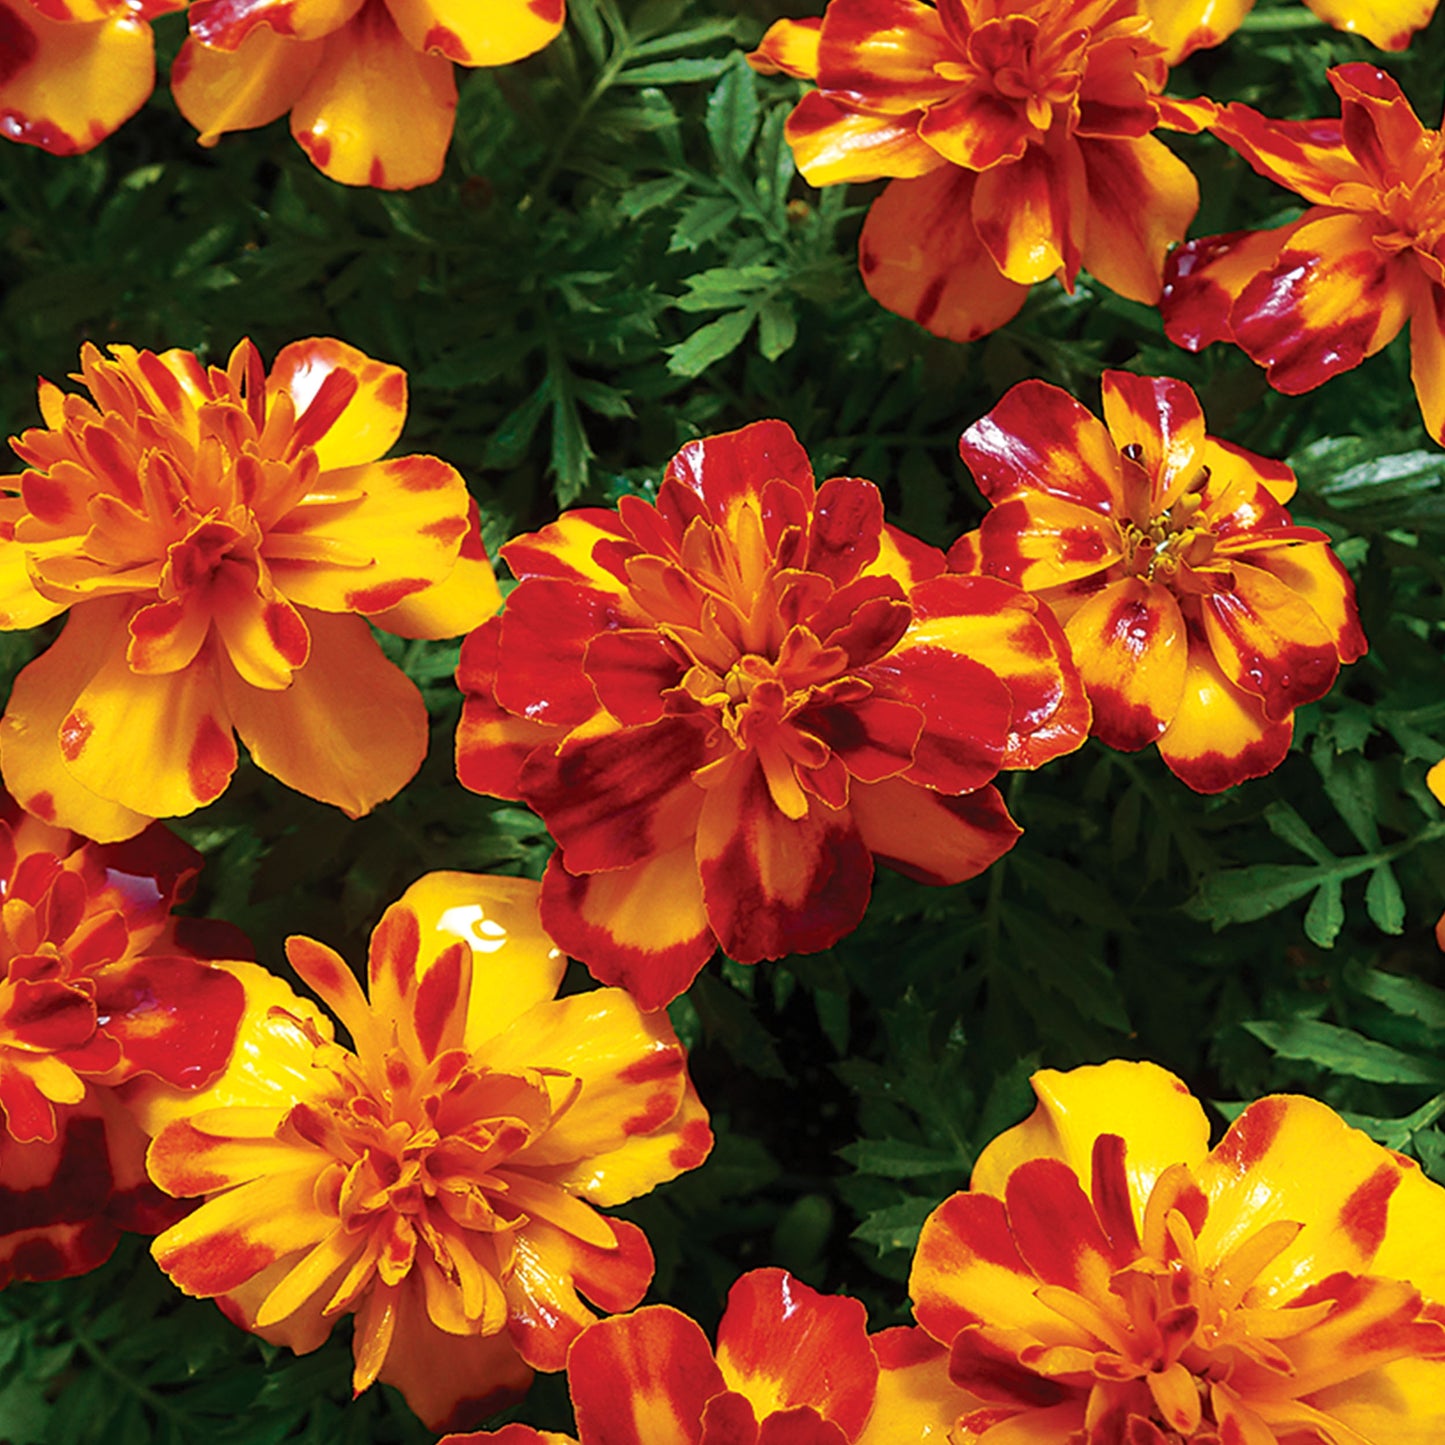 Dwarf Bolero Marigold Seeds Half Hardy Annual Flower Seeds Ferry Morse_Picture shows close-up of red and gold hued marigold flowers blooming.